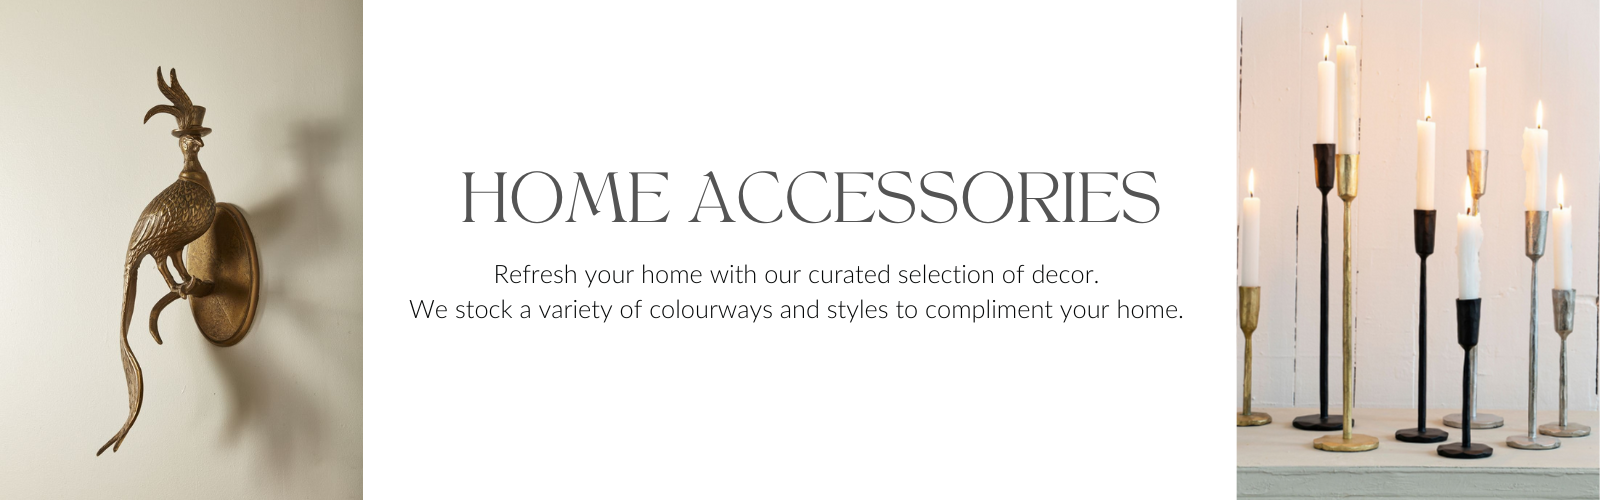 Home Accessories - The Art of Home